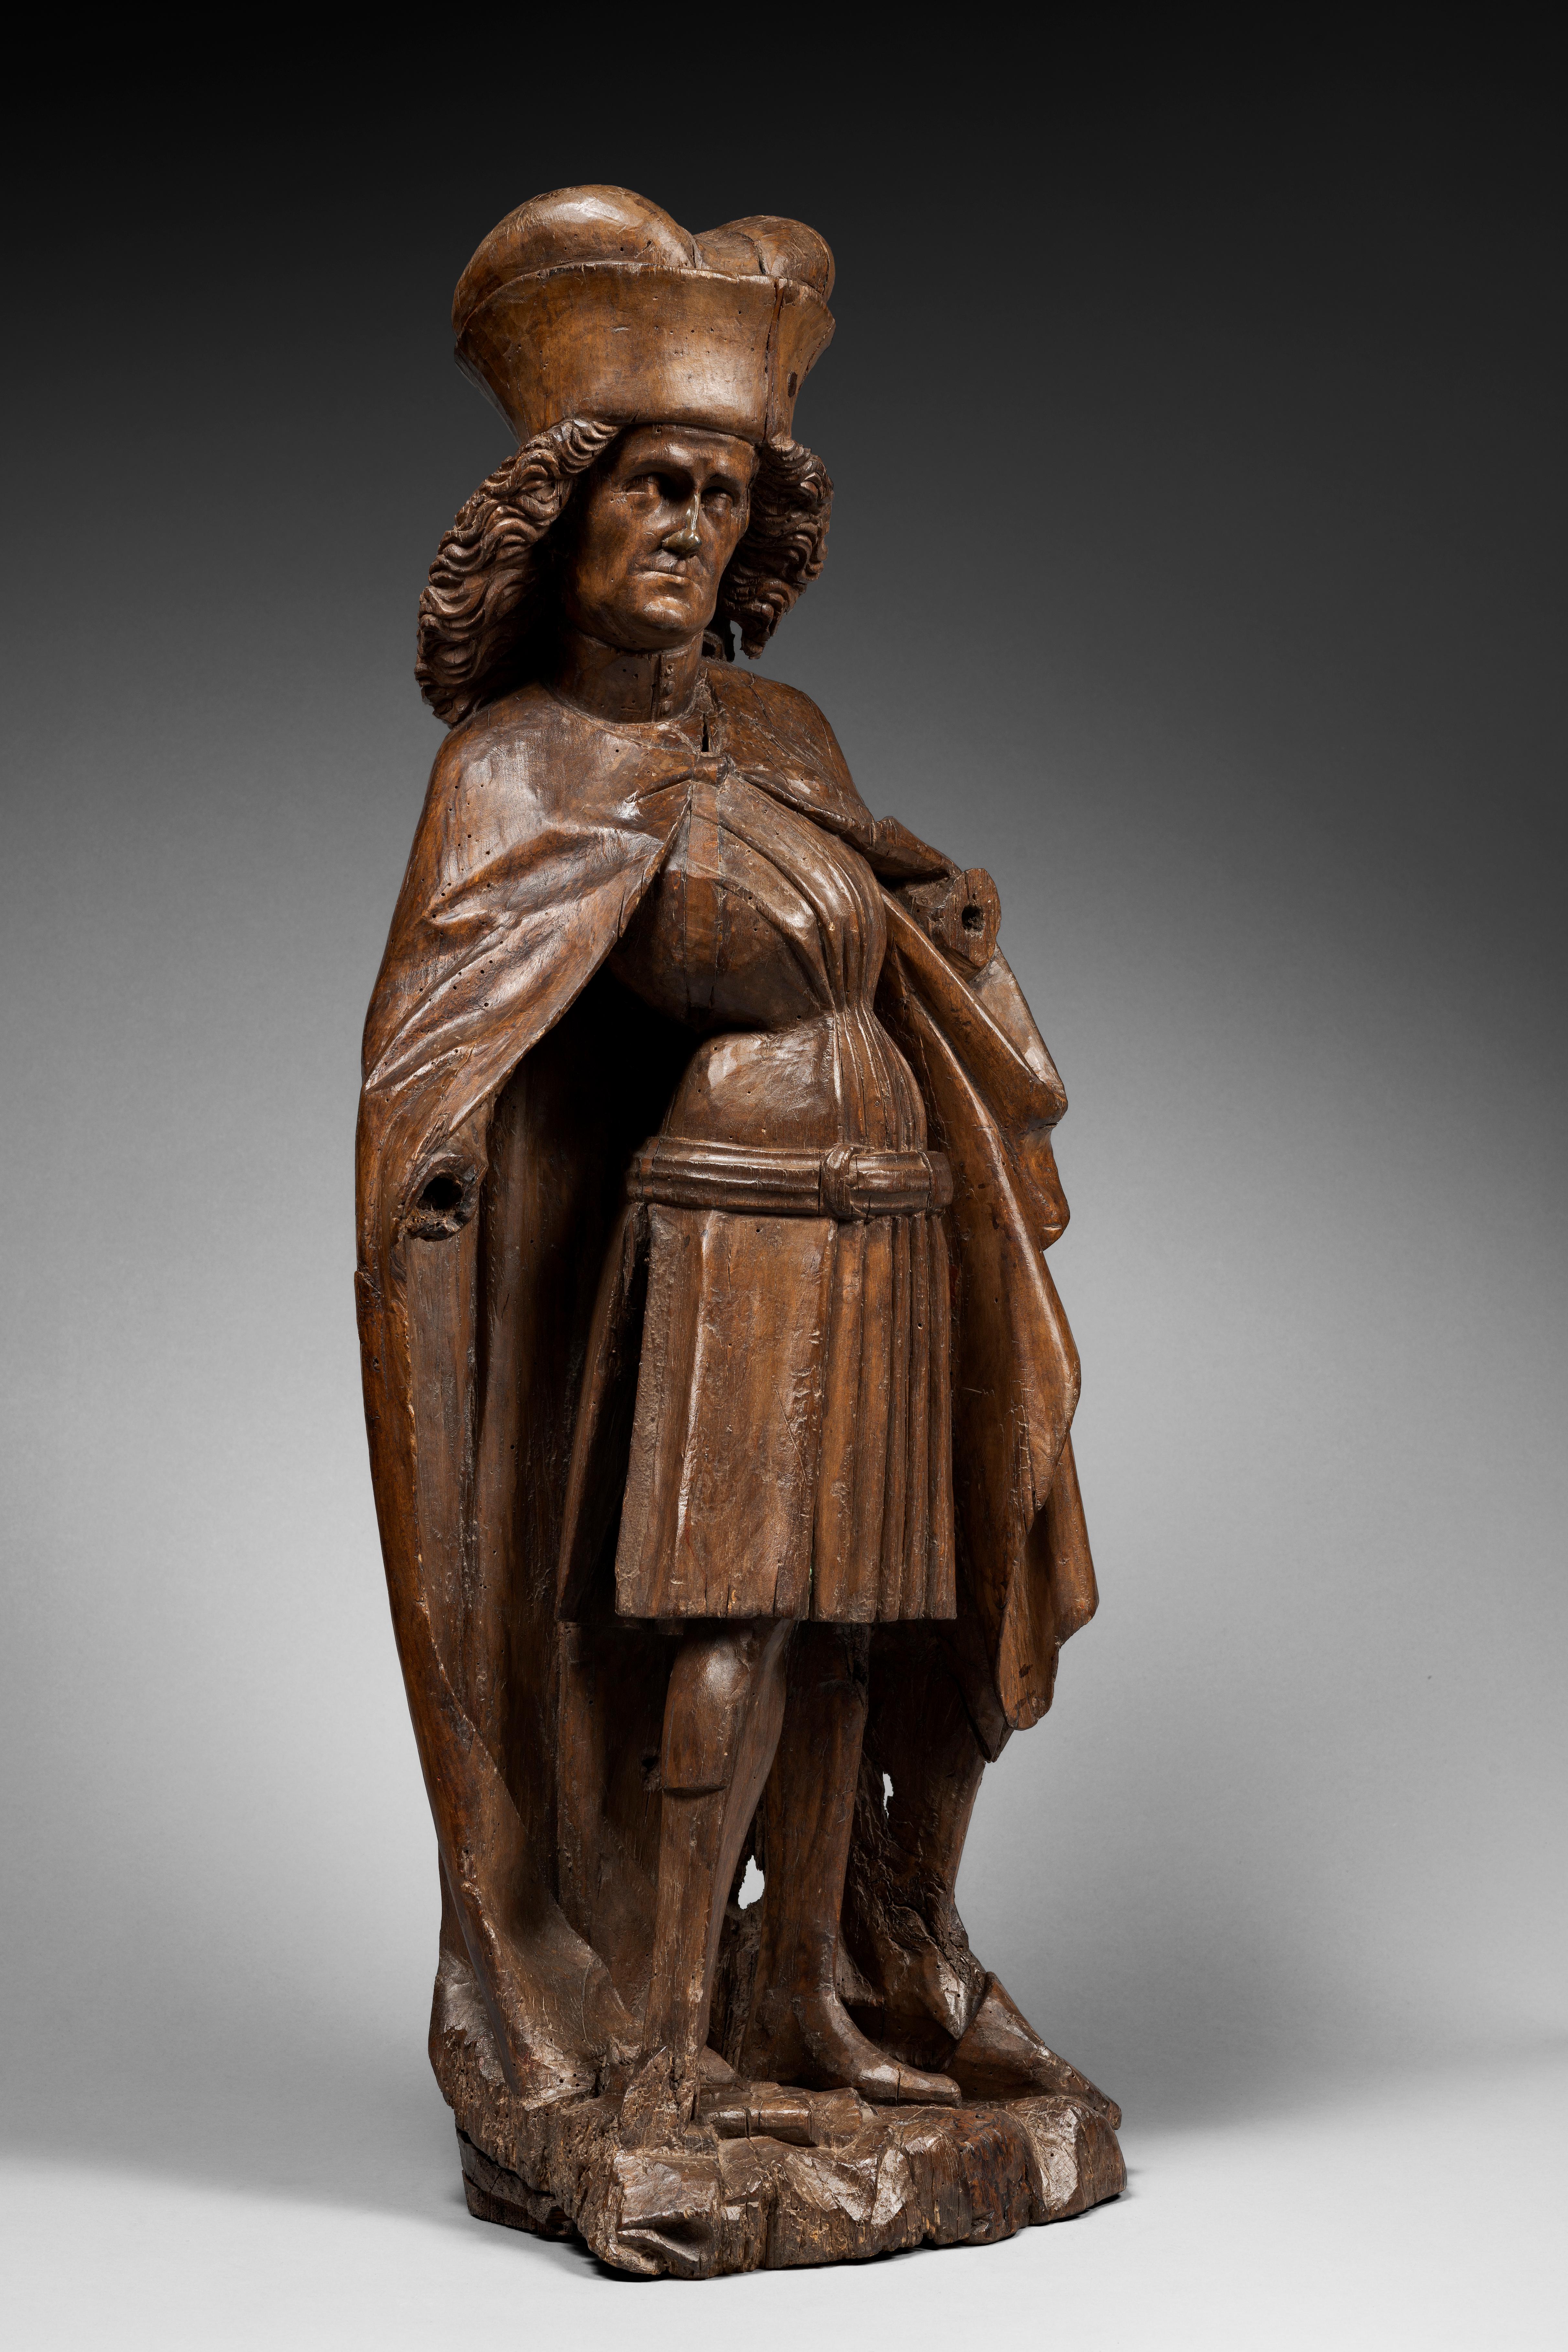 IMPORTANT WOOD SCULPTURE, GOTHIC DEPICTION OF SAINT WENCESLAUS

ORIGIN : CENTRAL EUROPE
PERIOD : MID-15th CENTURY

Height :   83 cm
Length : 30 cm
Depth : 20 cm

Basswood
Good condition

 
Wenceslas I or Václav in Czech was one of the first Dukes of